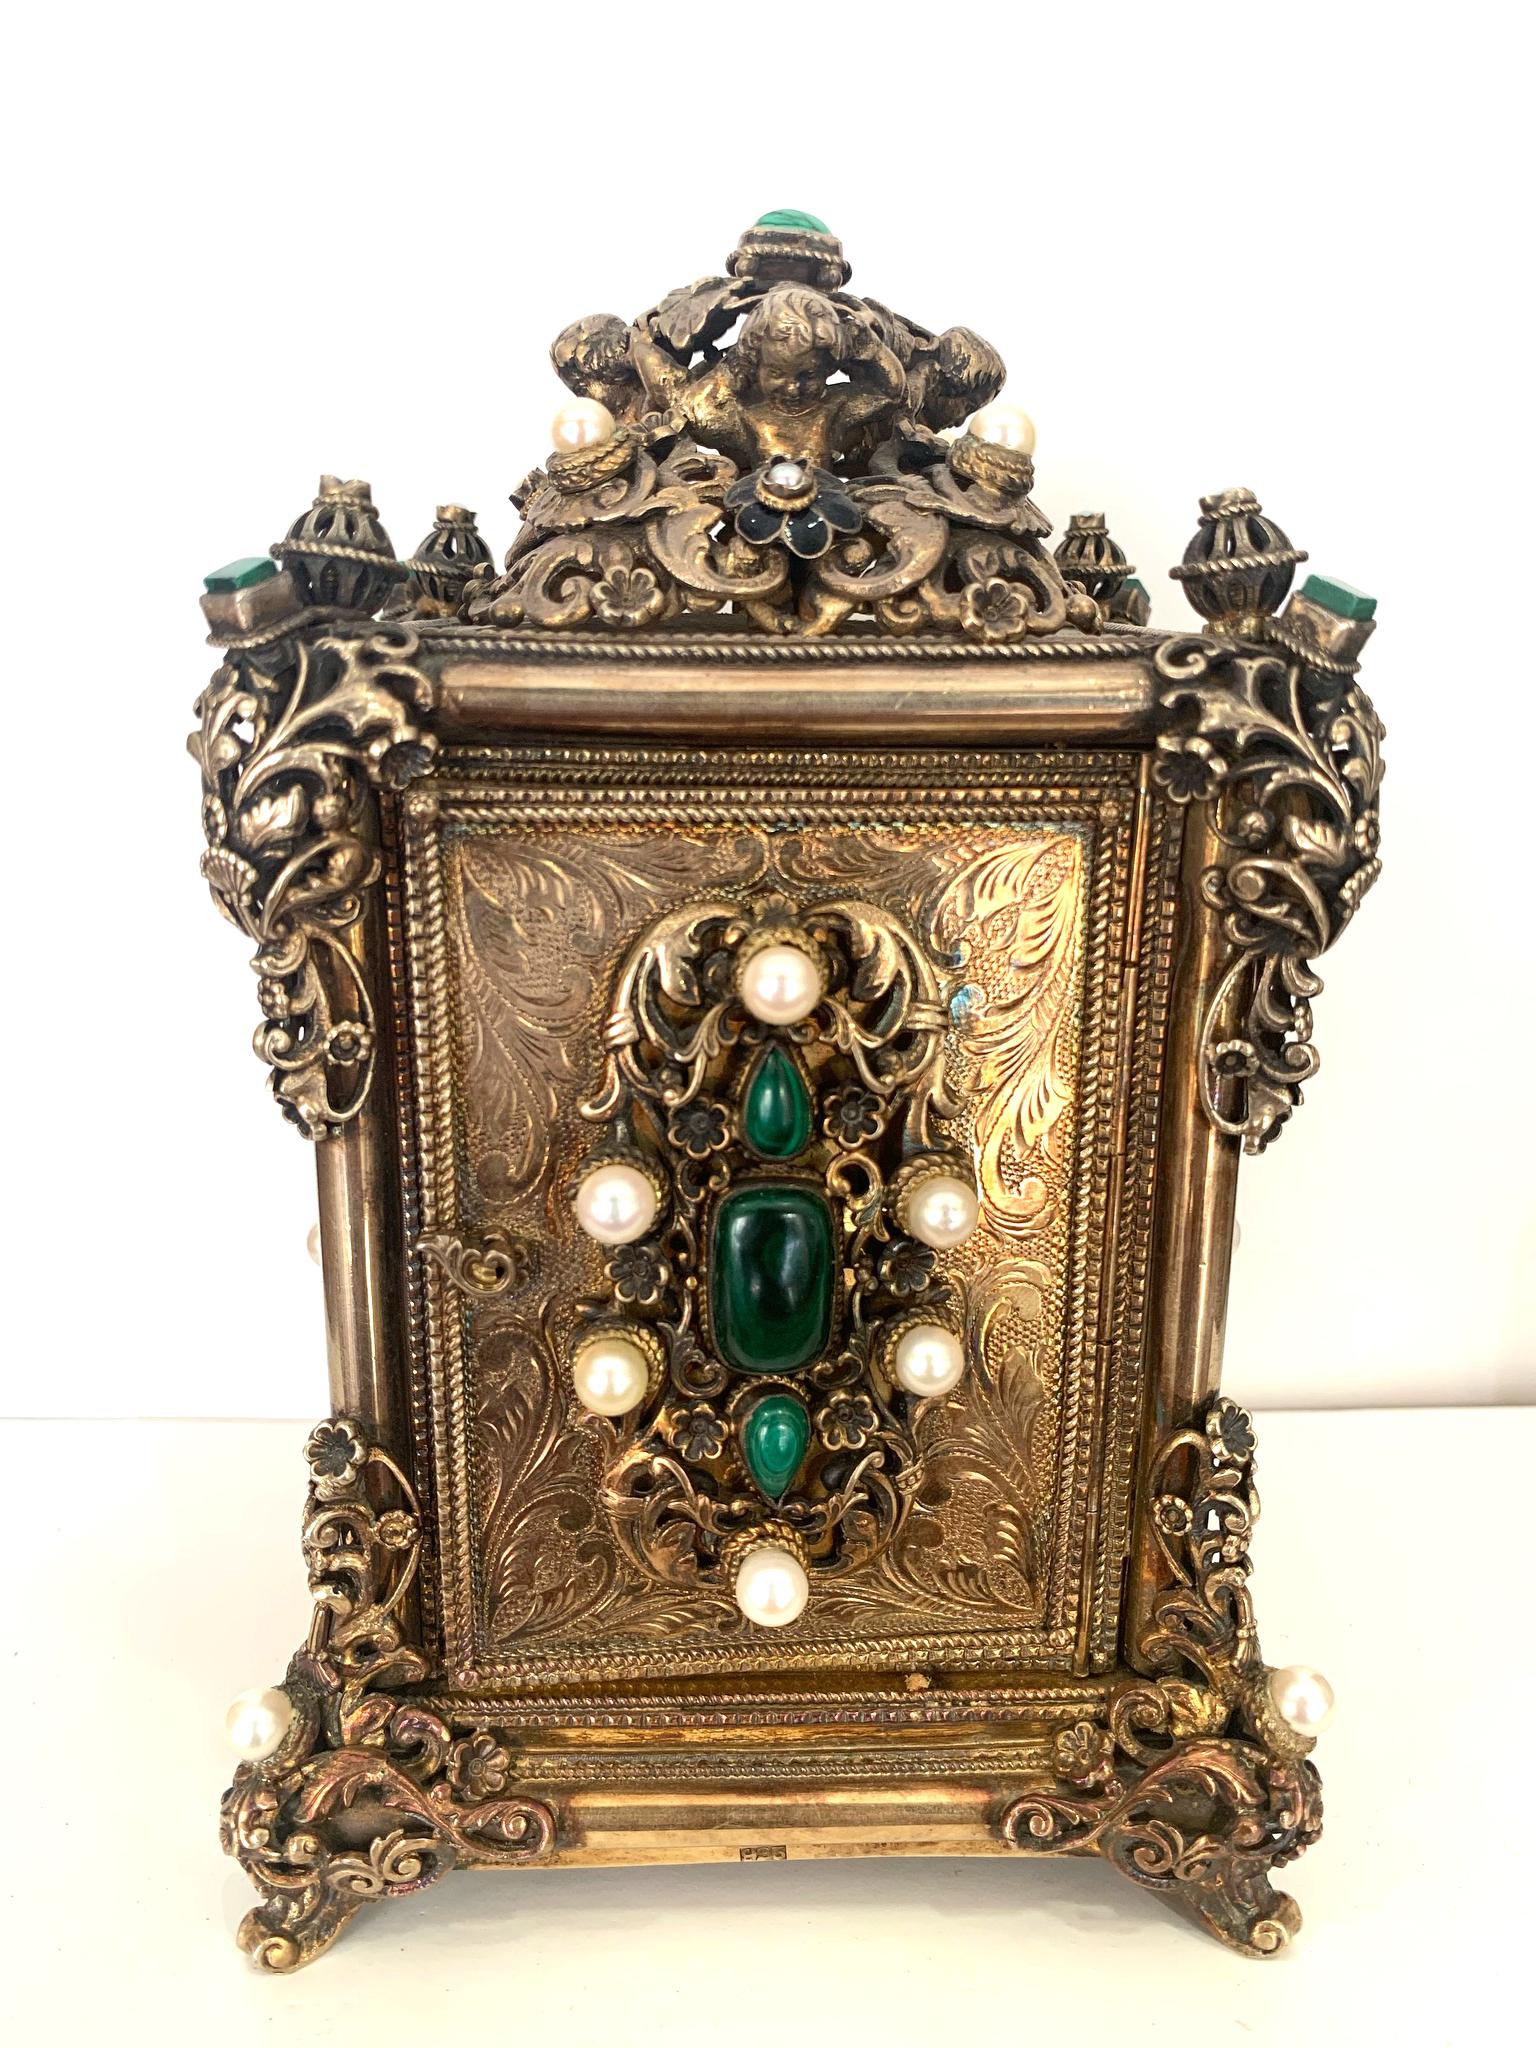 Ancient Table Clock

Beautifully designed clock from the 30's. 
Made of silver with pearls and valuable green stones.

